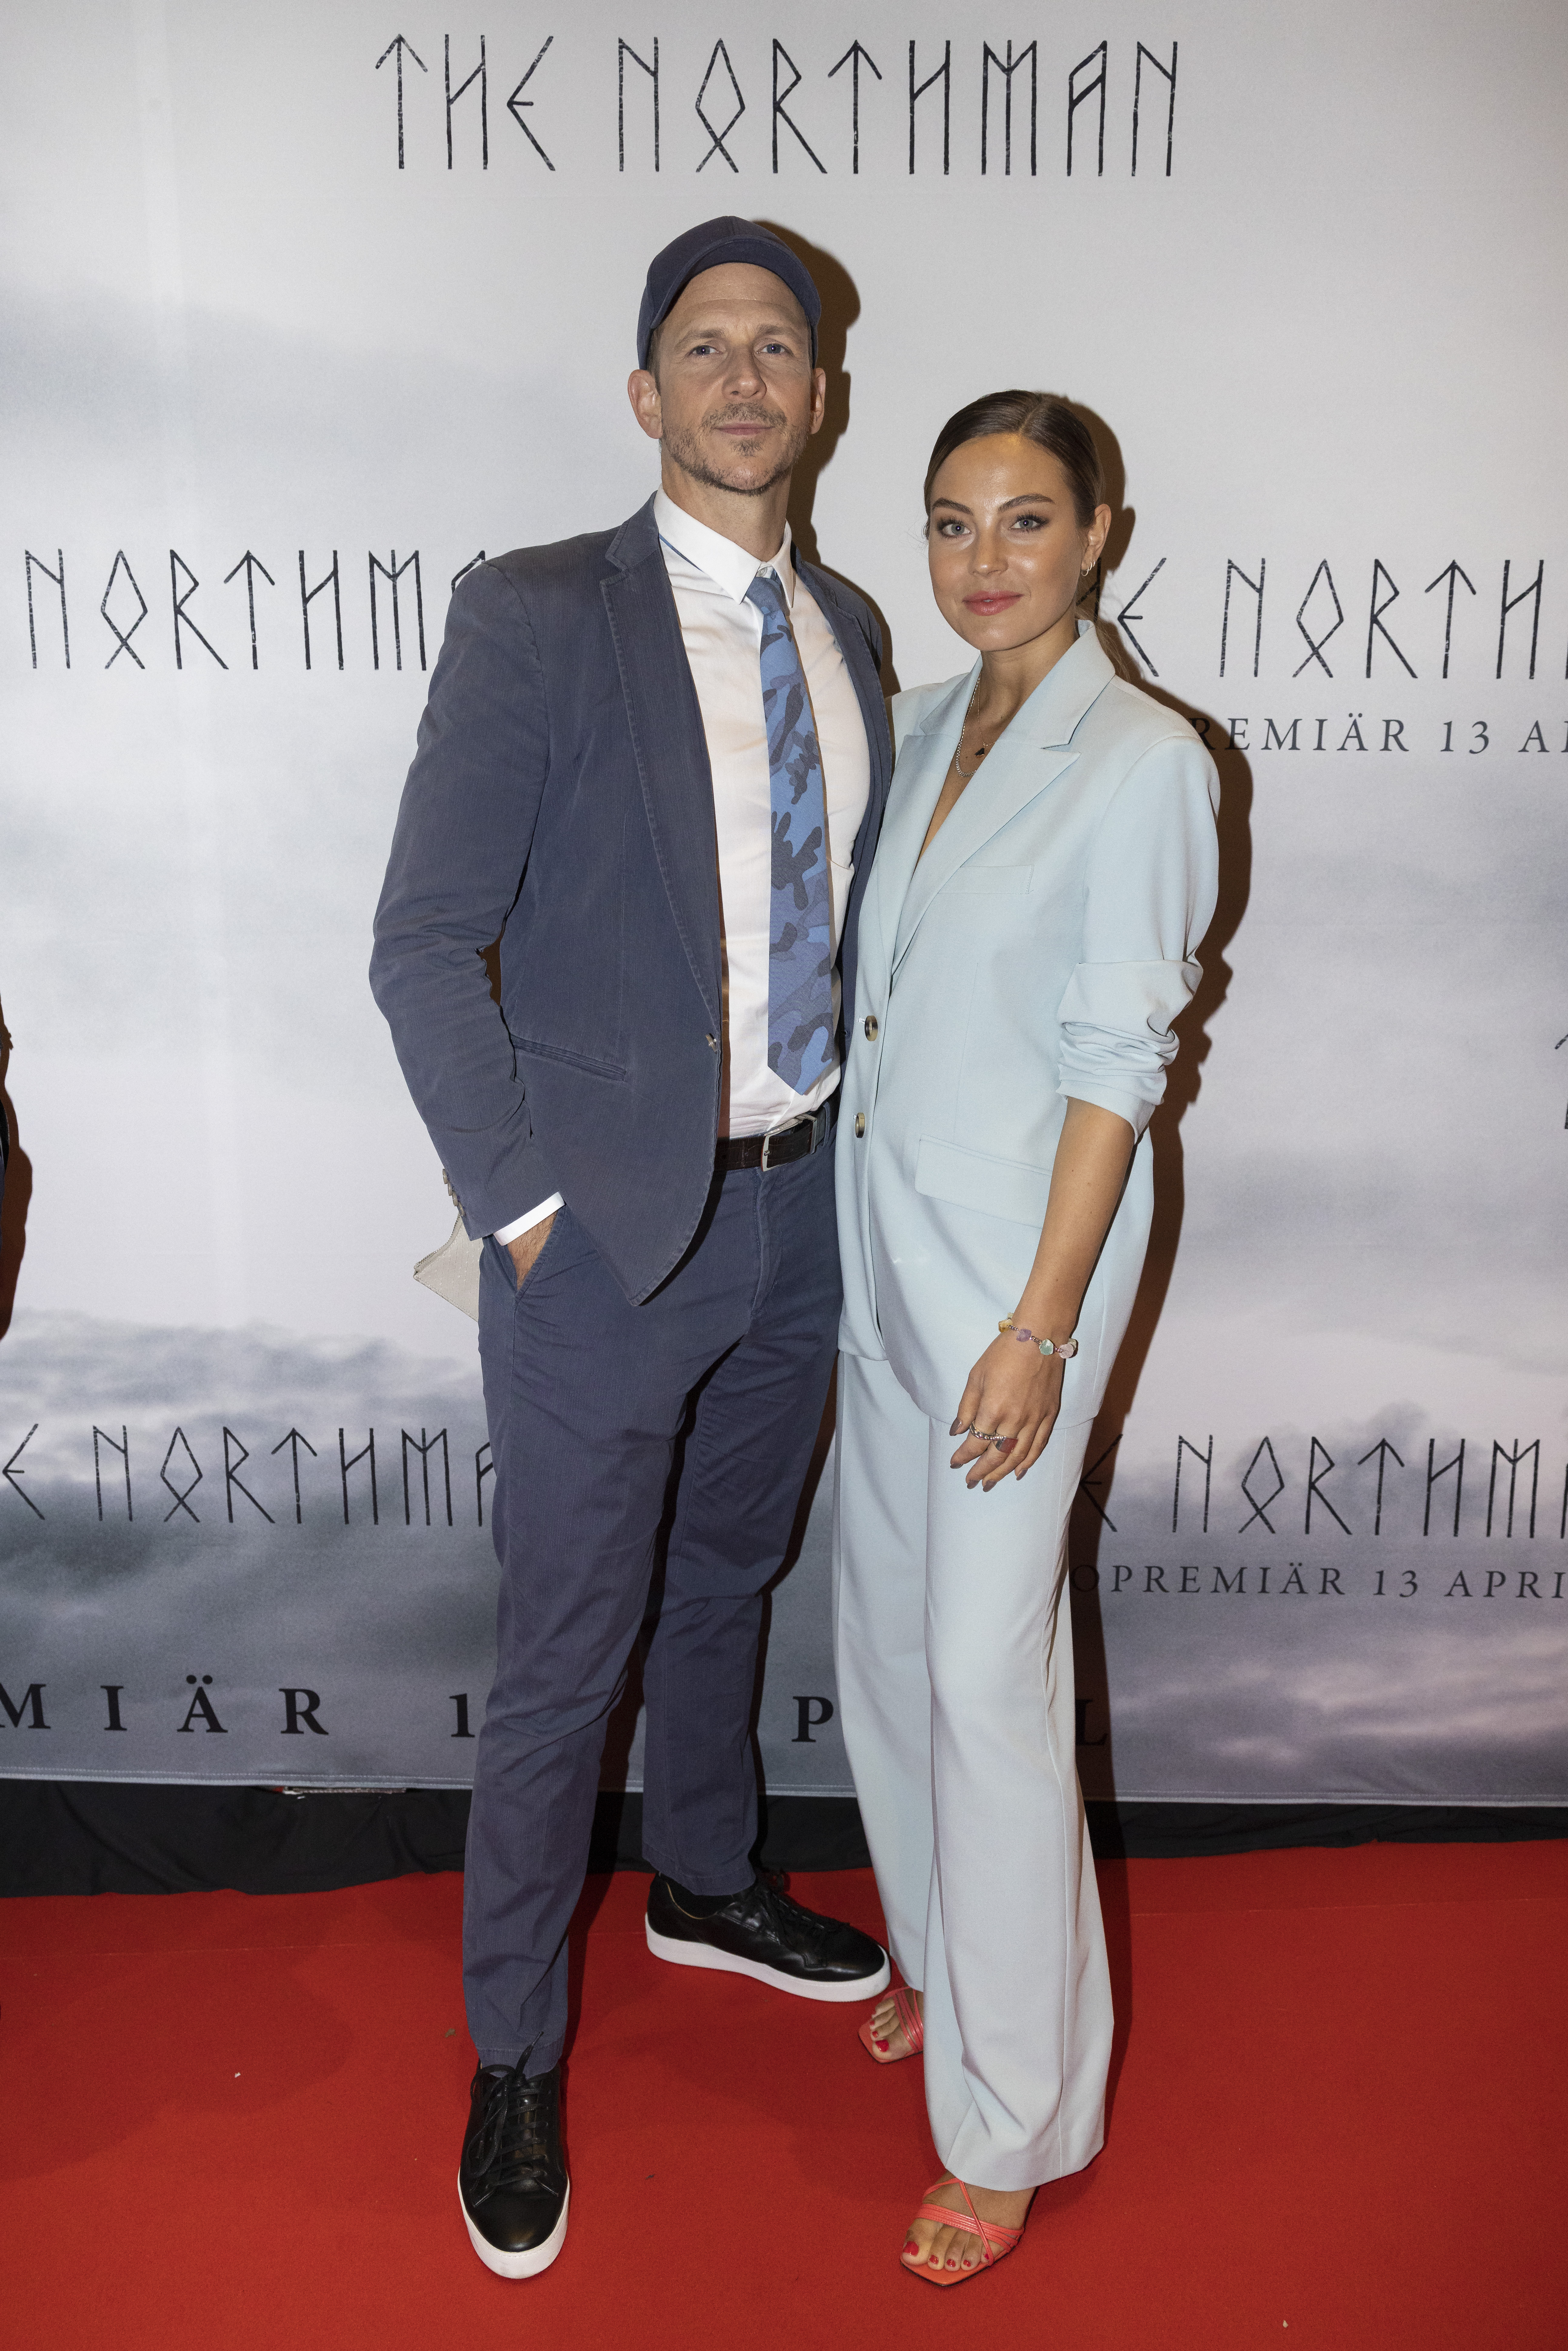 Gustaf Skarsgard and his girlfriend Caroline Sjostrom attend the Swedish premiere of "The Northman" at the Rigoletto Cinema on March 28, 2022 in Stockholm, Sweden | Source: Getty Images